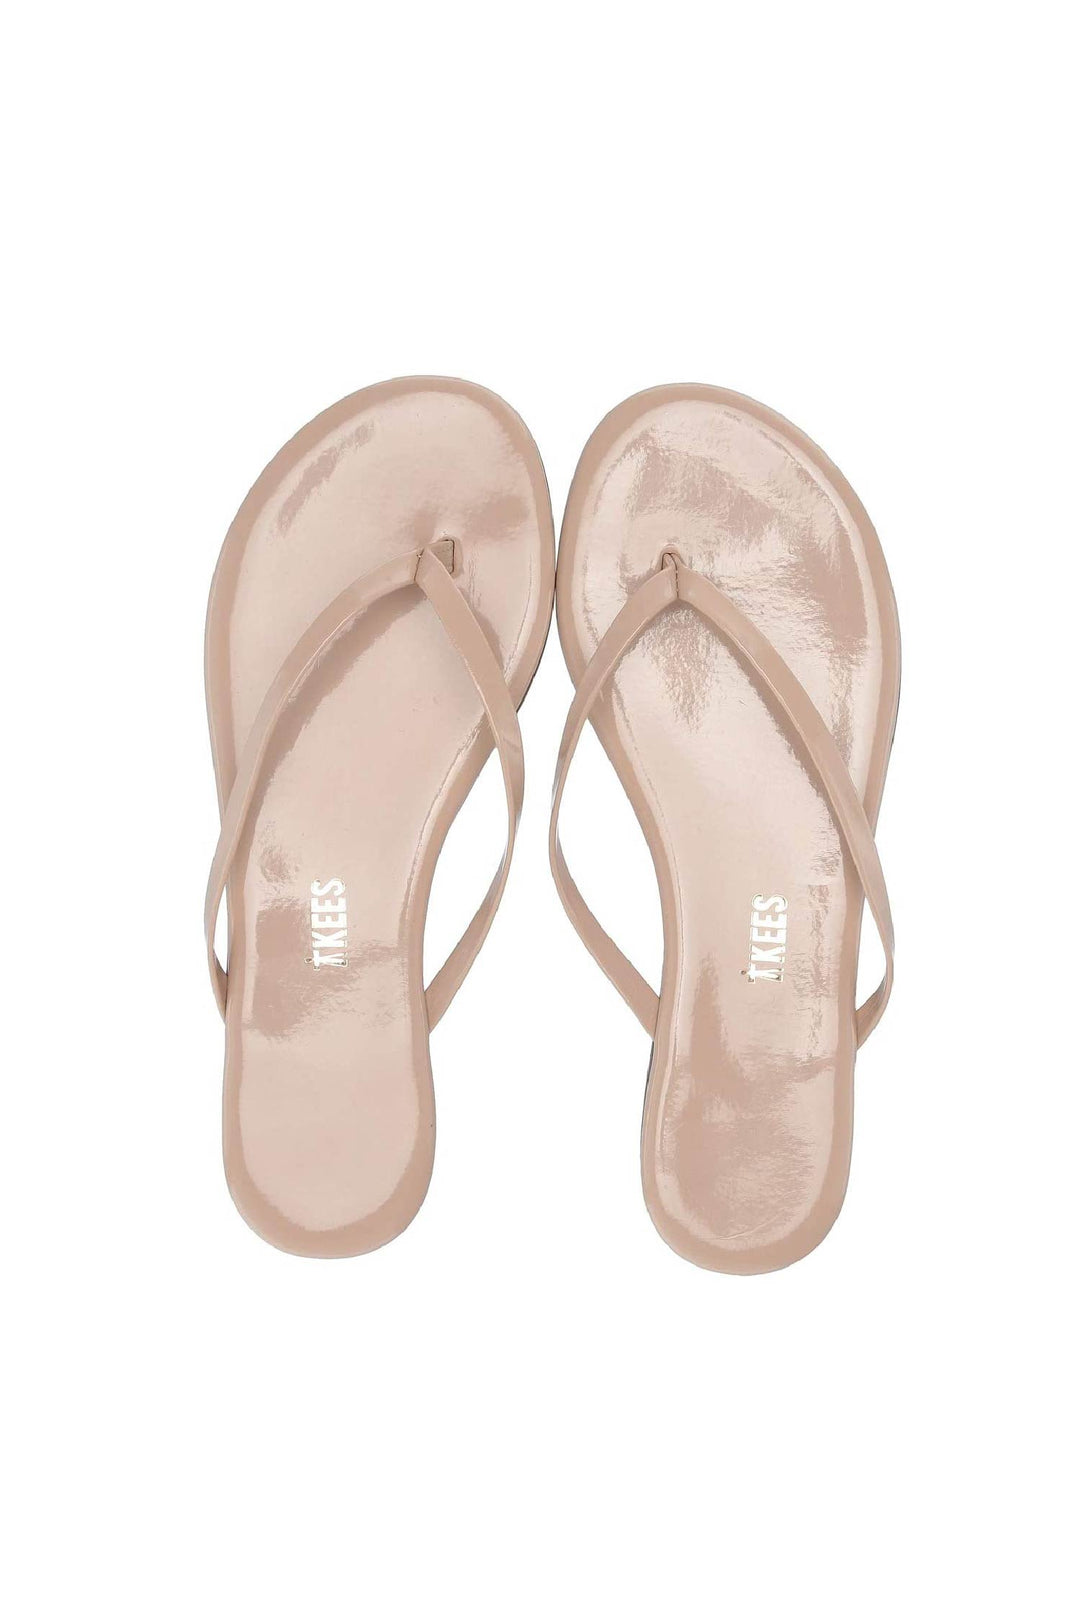 FOUNDATIONS GLOSS SANDALS- SUNKISSED